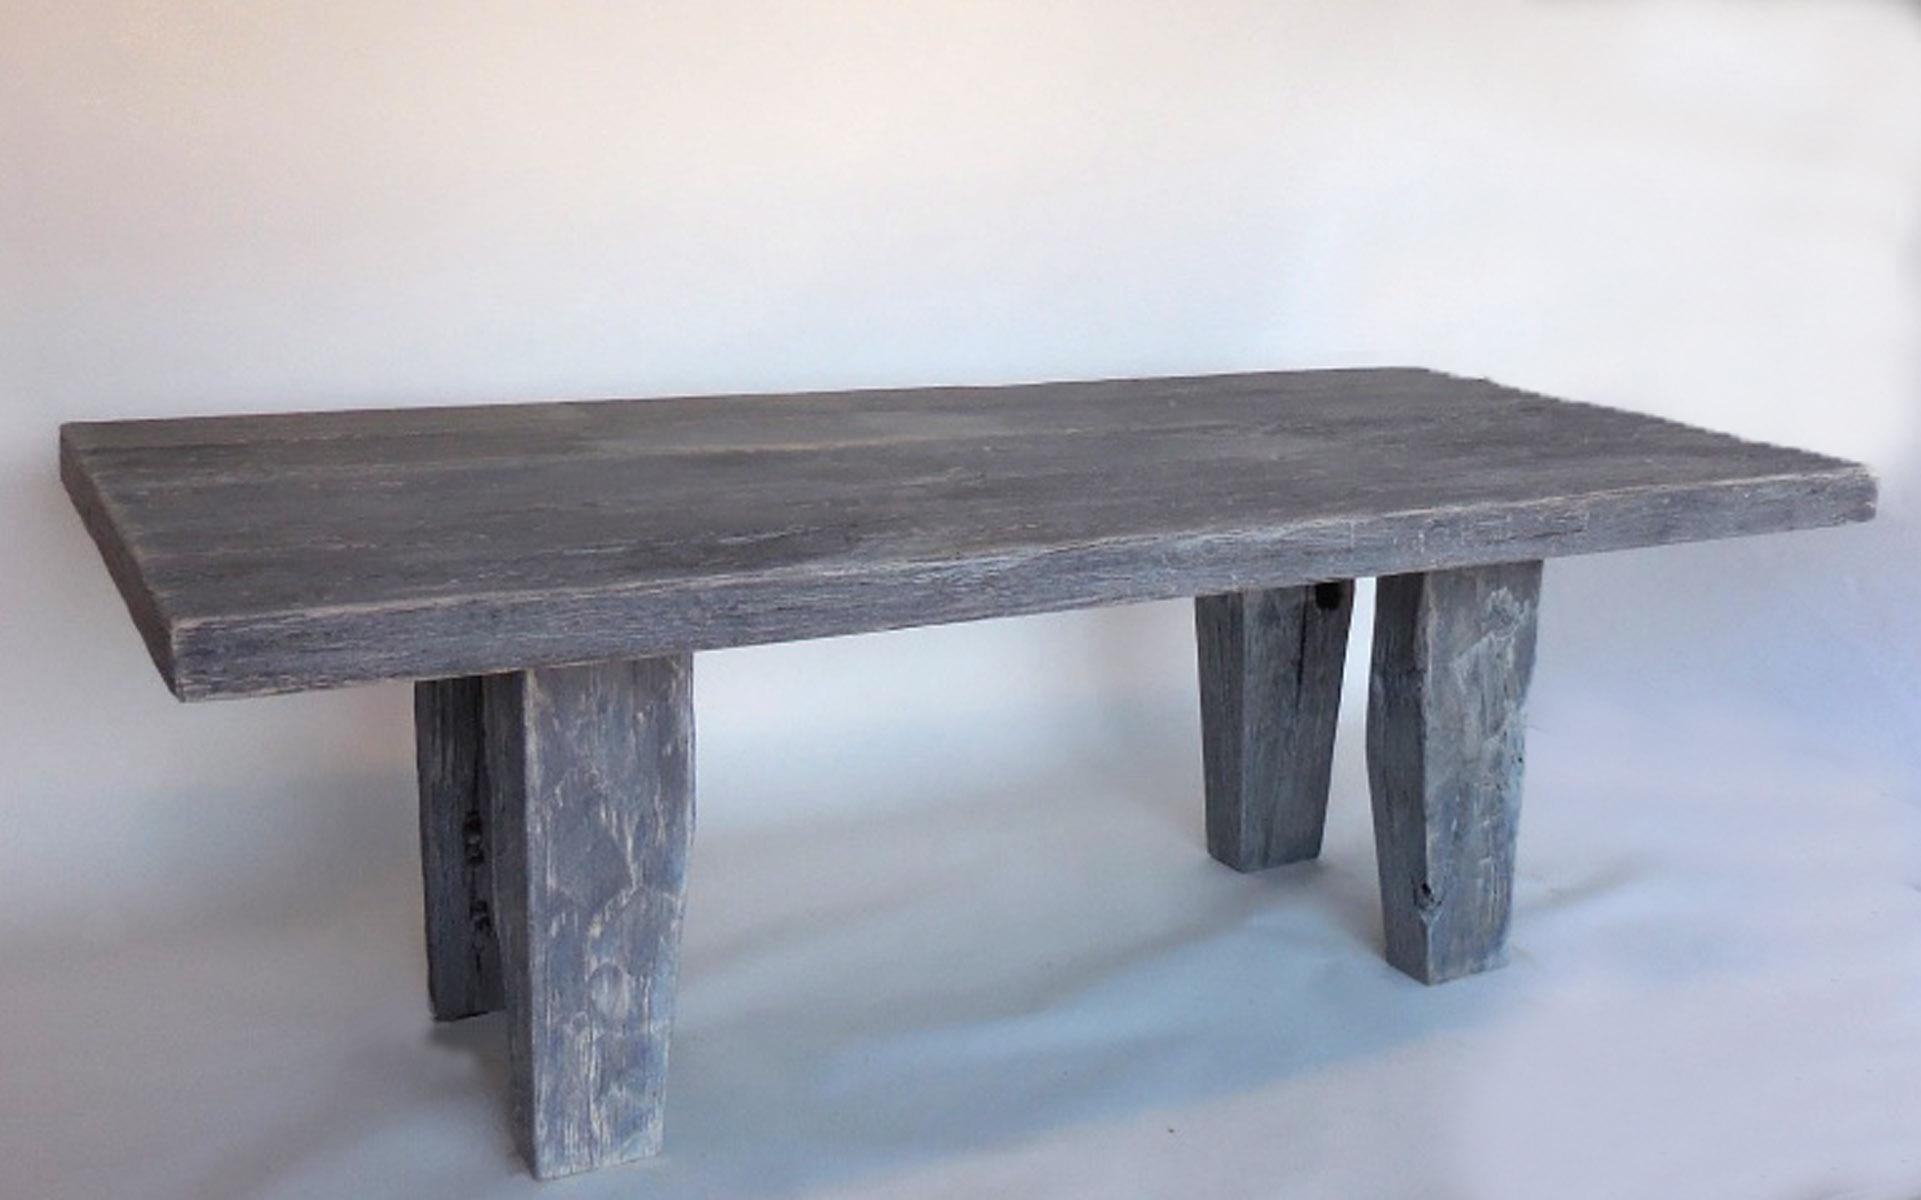 Sculptural dining table, made from reclaimed hand hewn cypress wood. Light grey beige finish. Large legs taper to the floor. The wood is textured but smooth to the touch. Thick top and legs. From Guatemala.

 